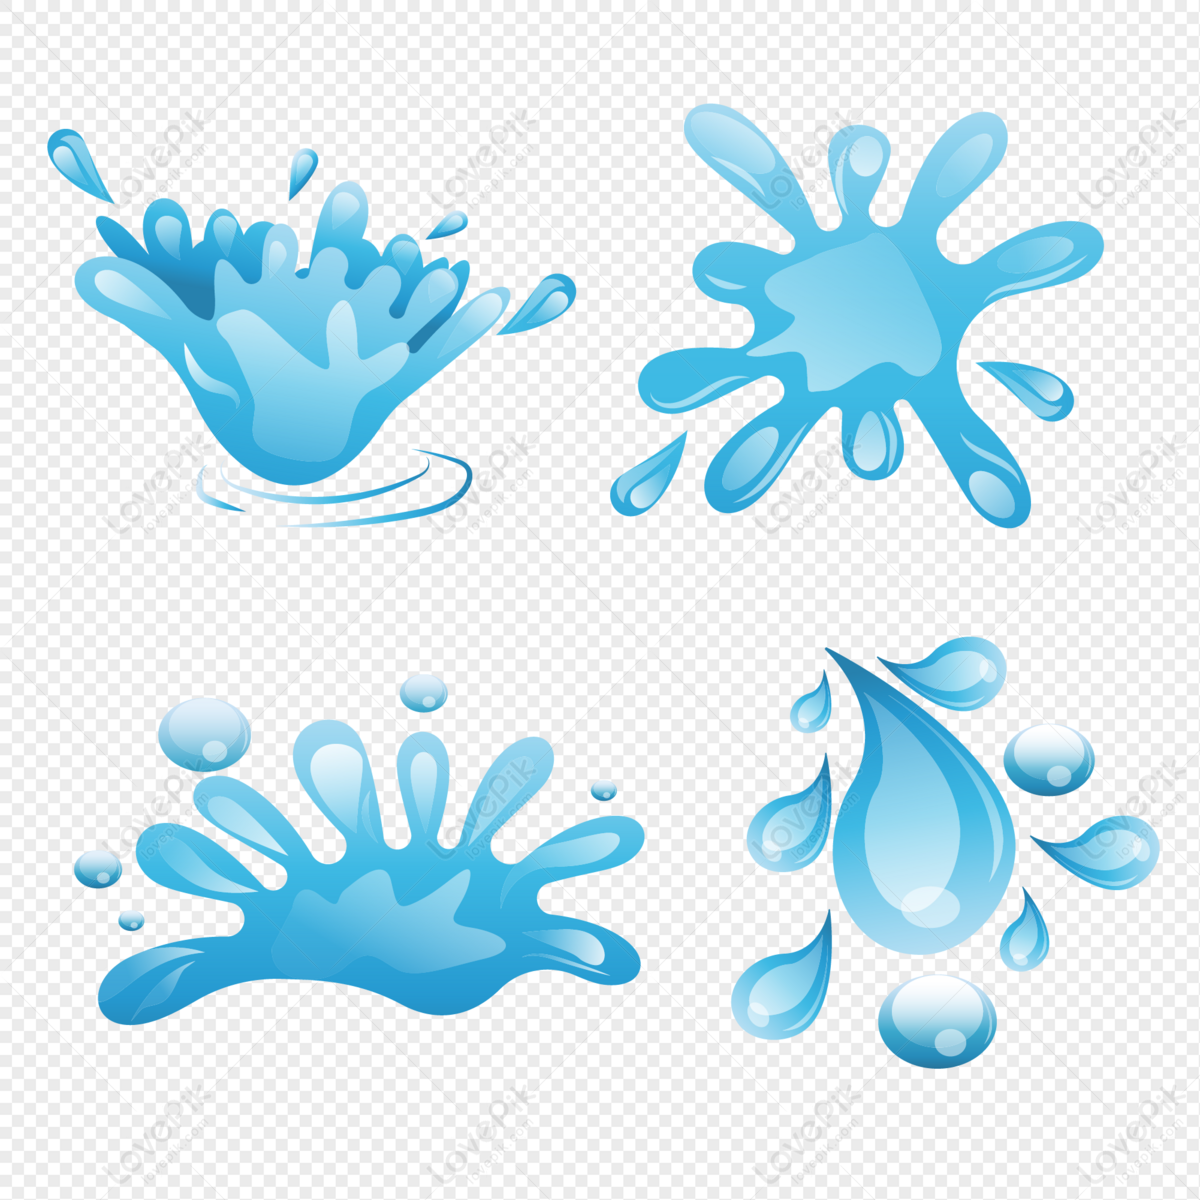 Splashing Water PNG Image And Clipart Image For Free Download - Lovepik |  401437758